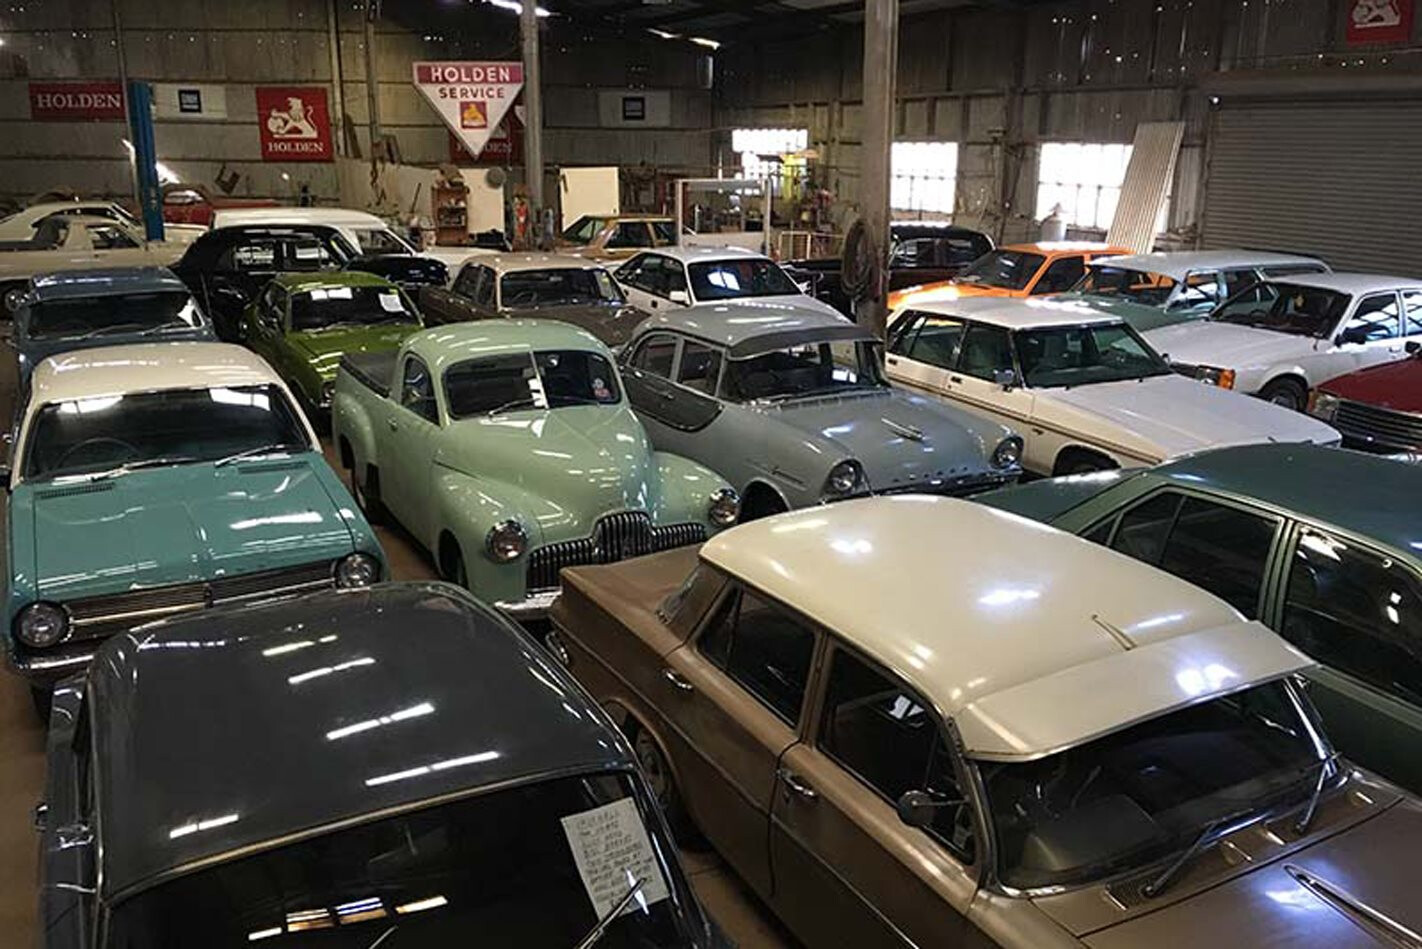 THE ULTIMATE HOLDEN CLASSIC CAR COLLECTION